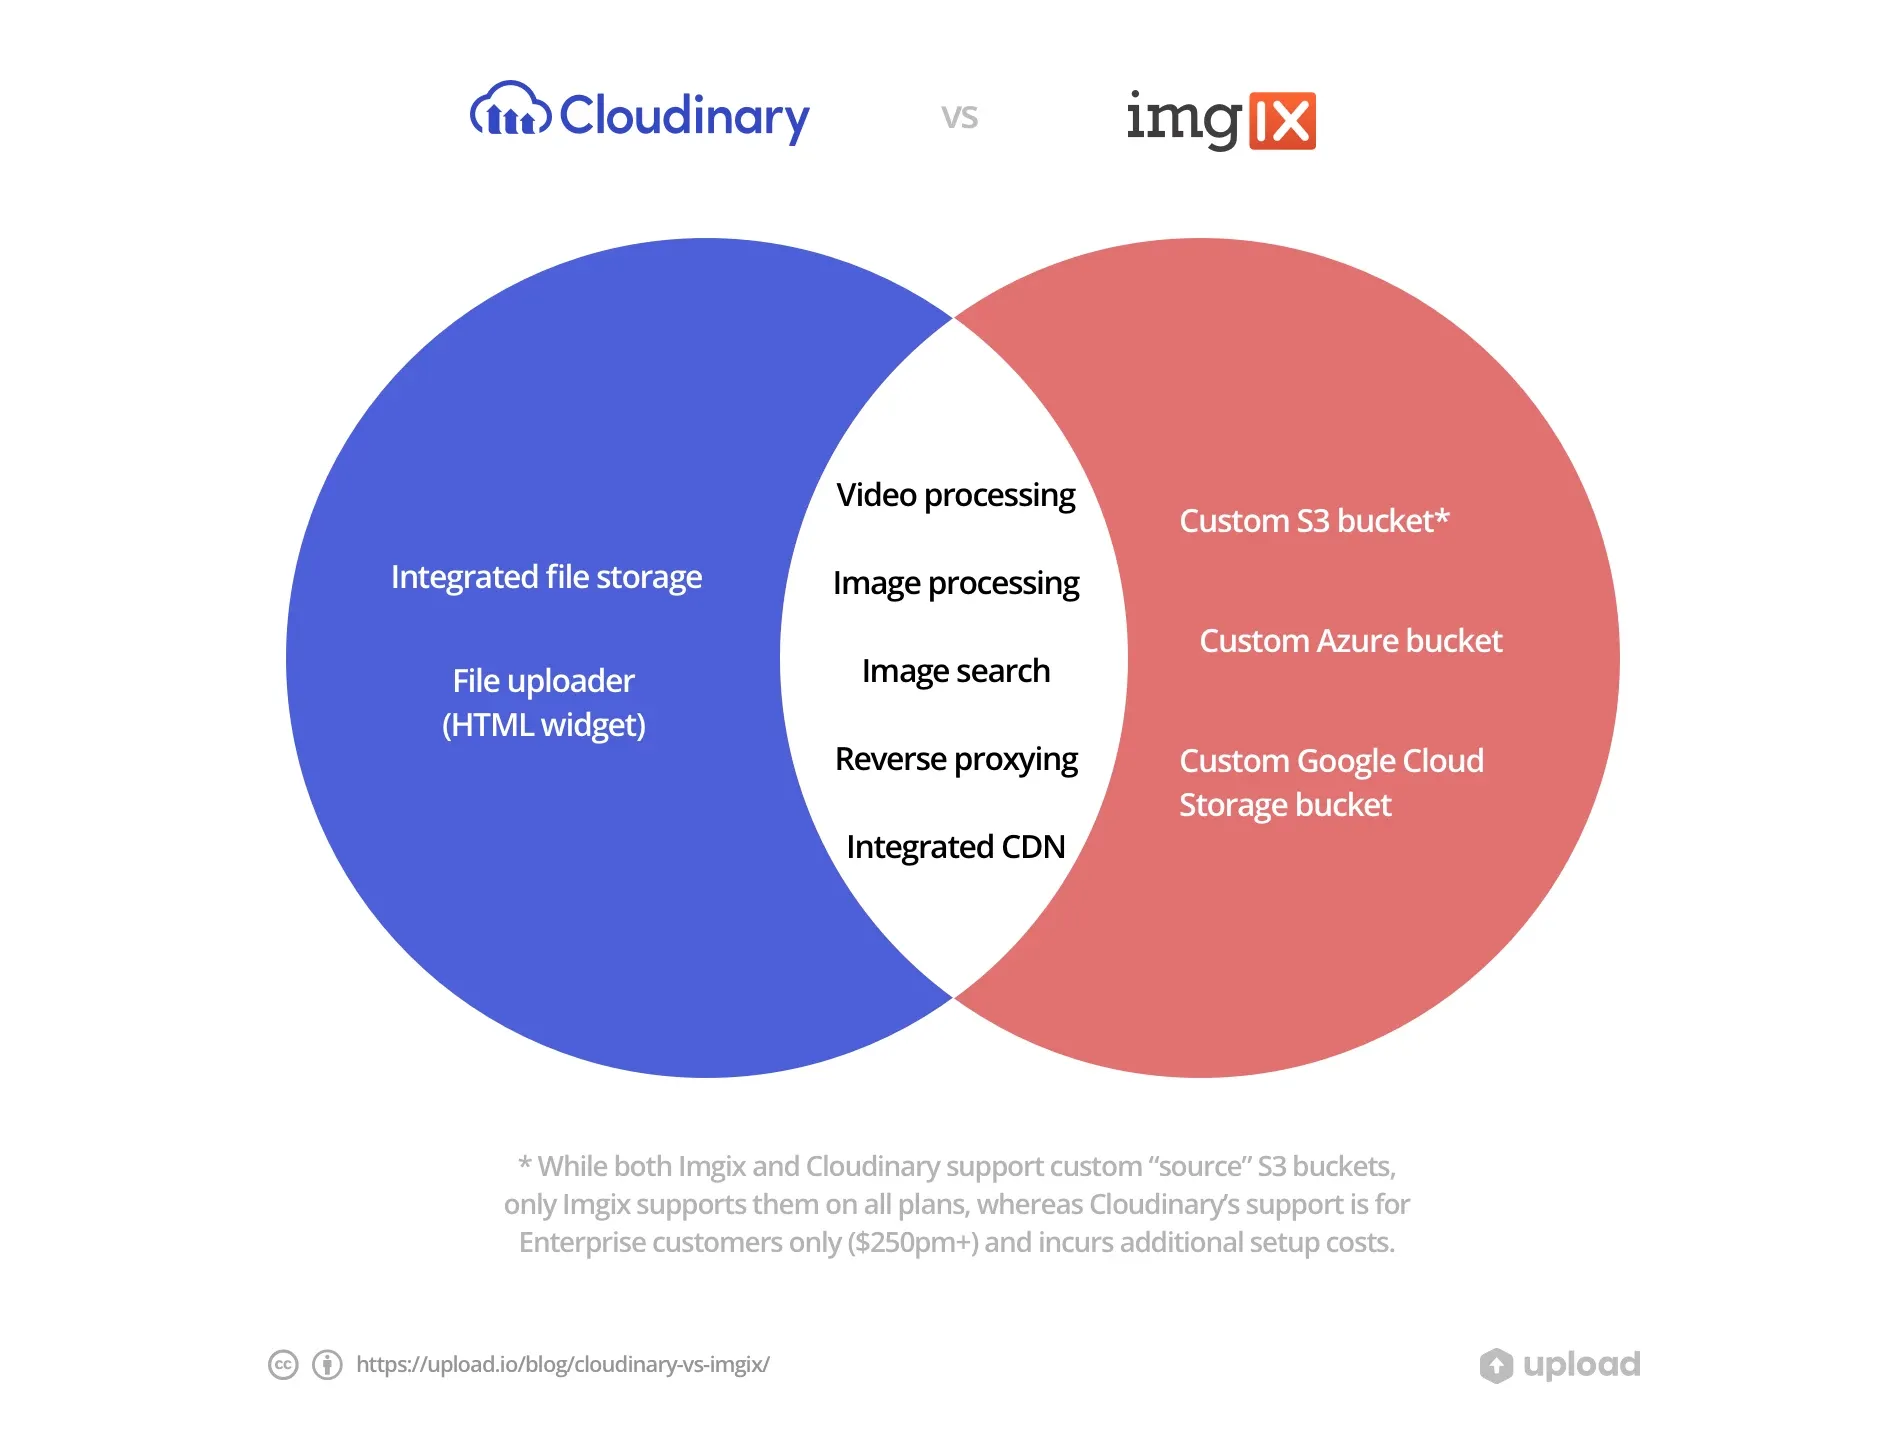 Cloudinary vs Imgix: What is the difference?